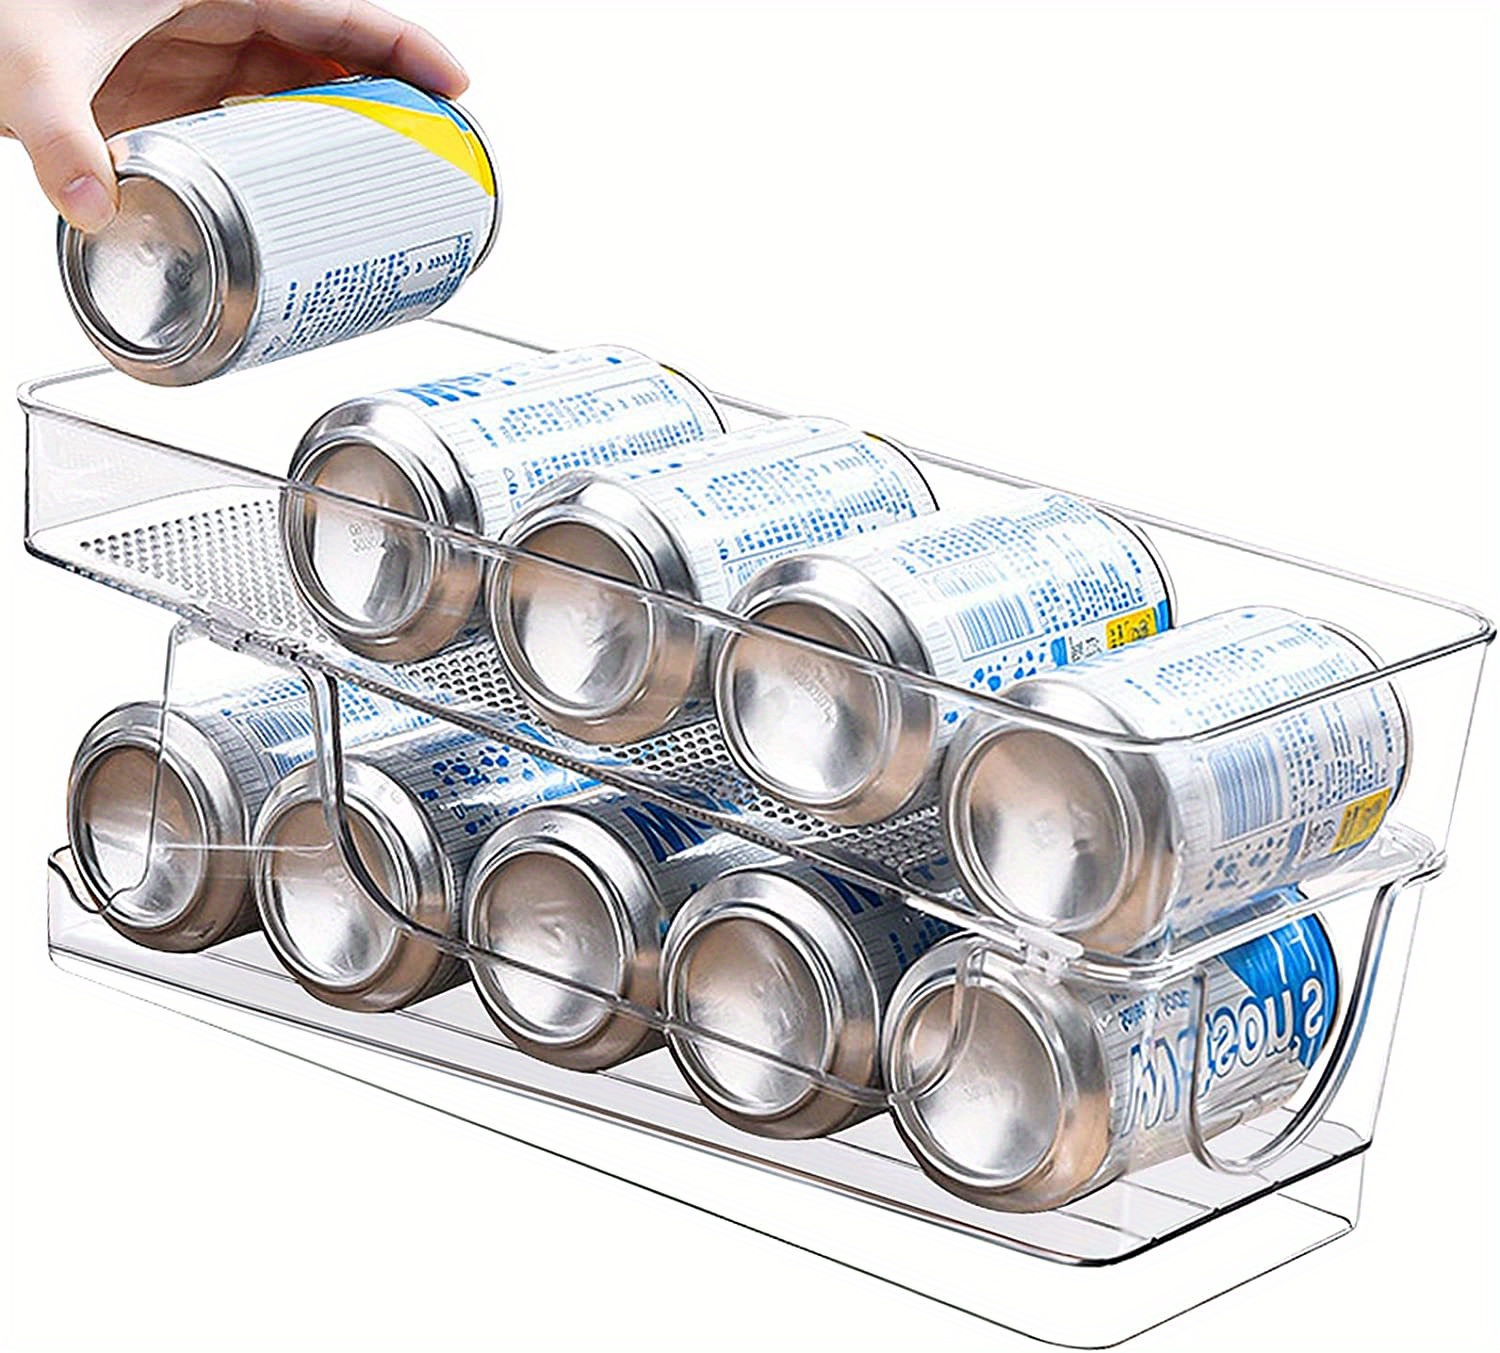 NKTIER Soda Can Storage Organizer,Double-Layer Automatic Rolling